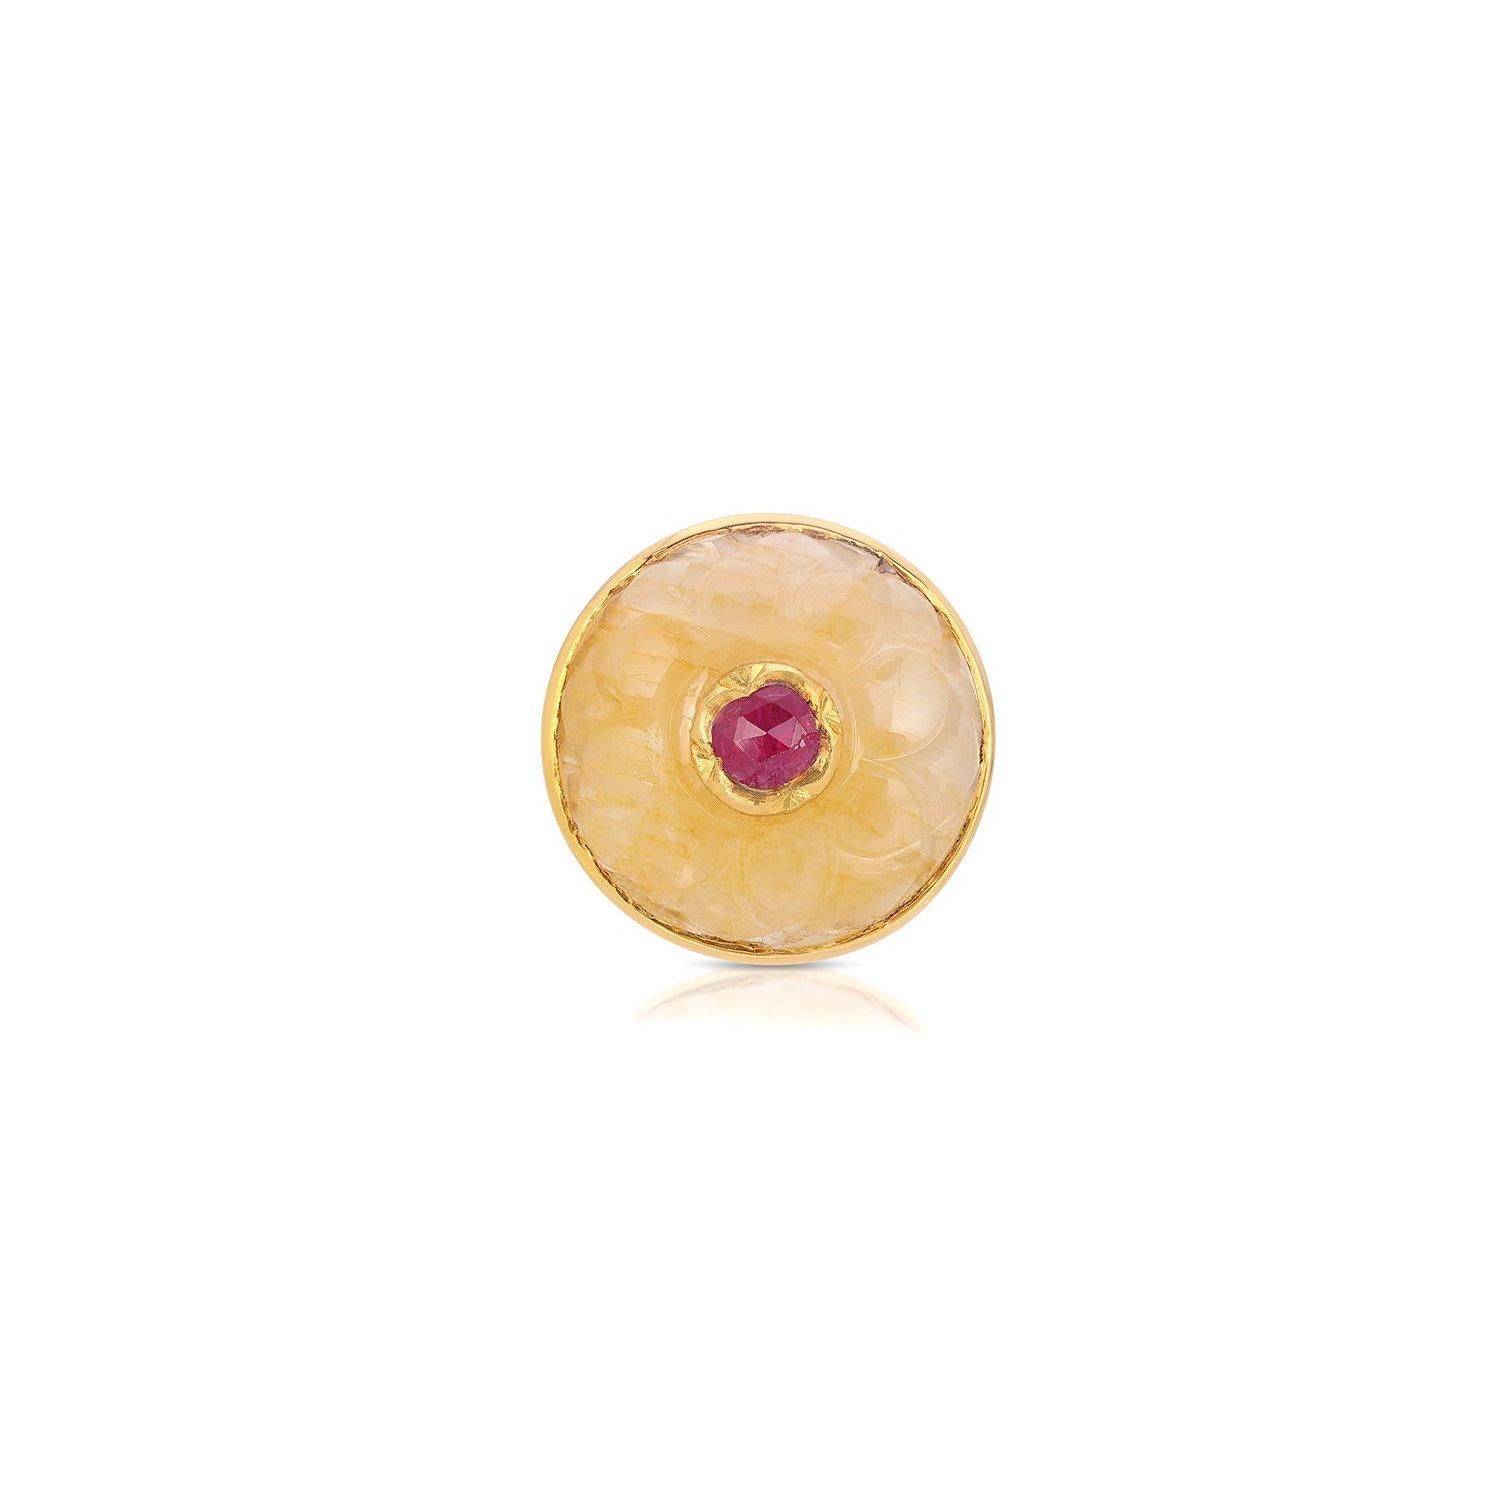 A stylish ring featuring a beautifully carved yellow cabochon Sapphire dome set with a pink Ruby which has been encased in a 'Kundan' style gold setting.

- Natural Yellow Sapphire weight approx 15 Carats. 
- Magenta Pink Ruby weight approx 1.10